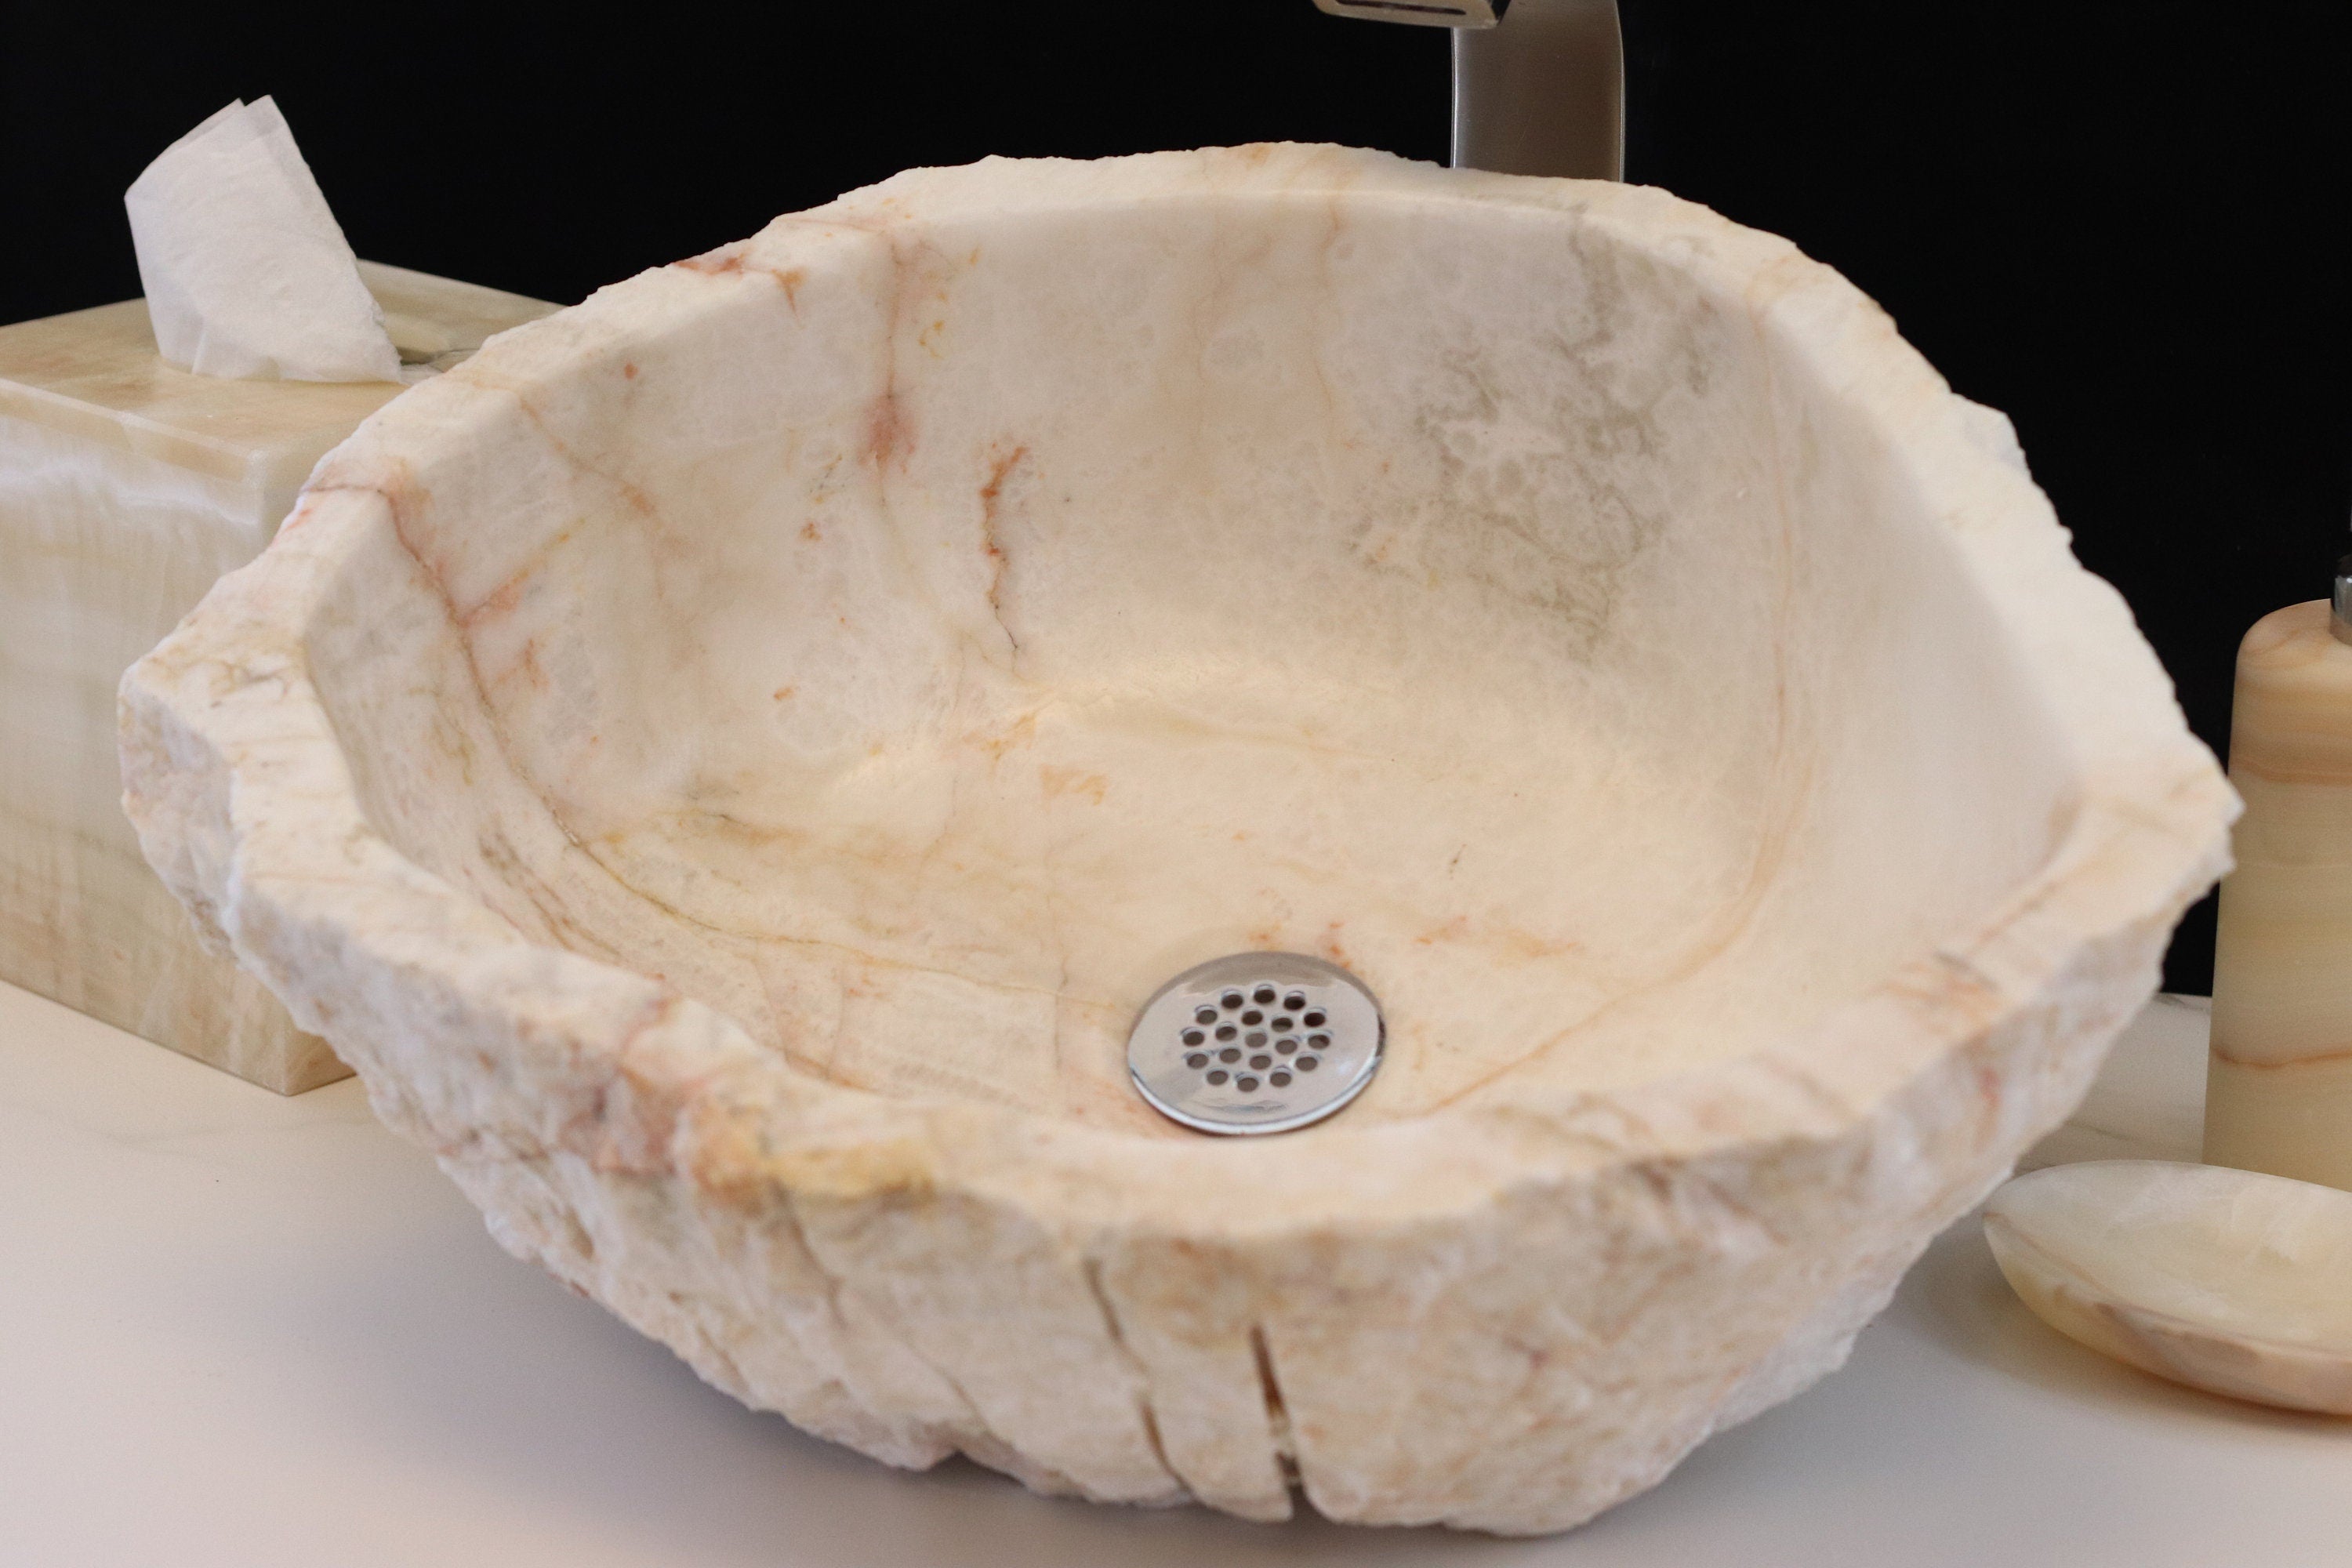 White and Beige Onyx Vessel Sink. Handmade in Mexico. We hand finish, package, and ship from the USA. Buy now at www.felipeandgrace.com. 